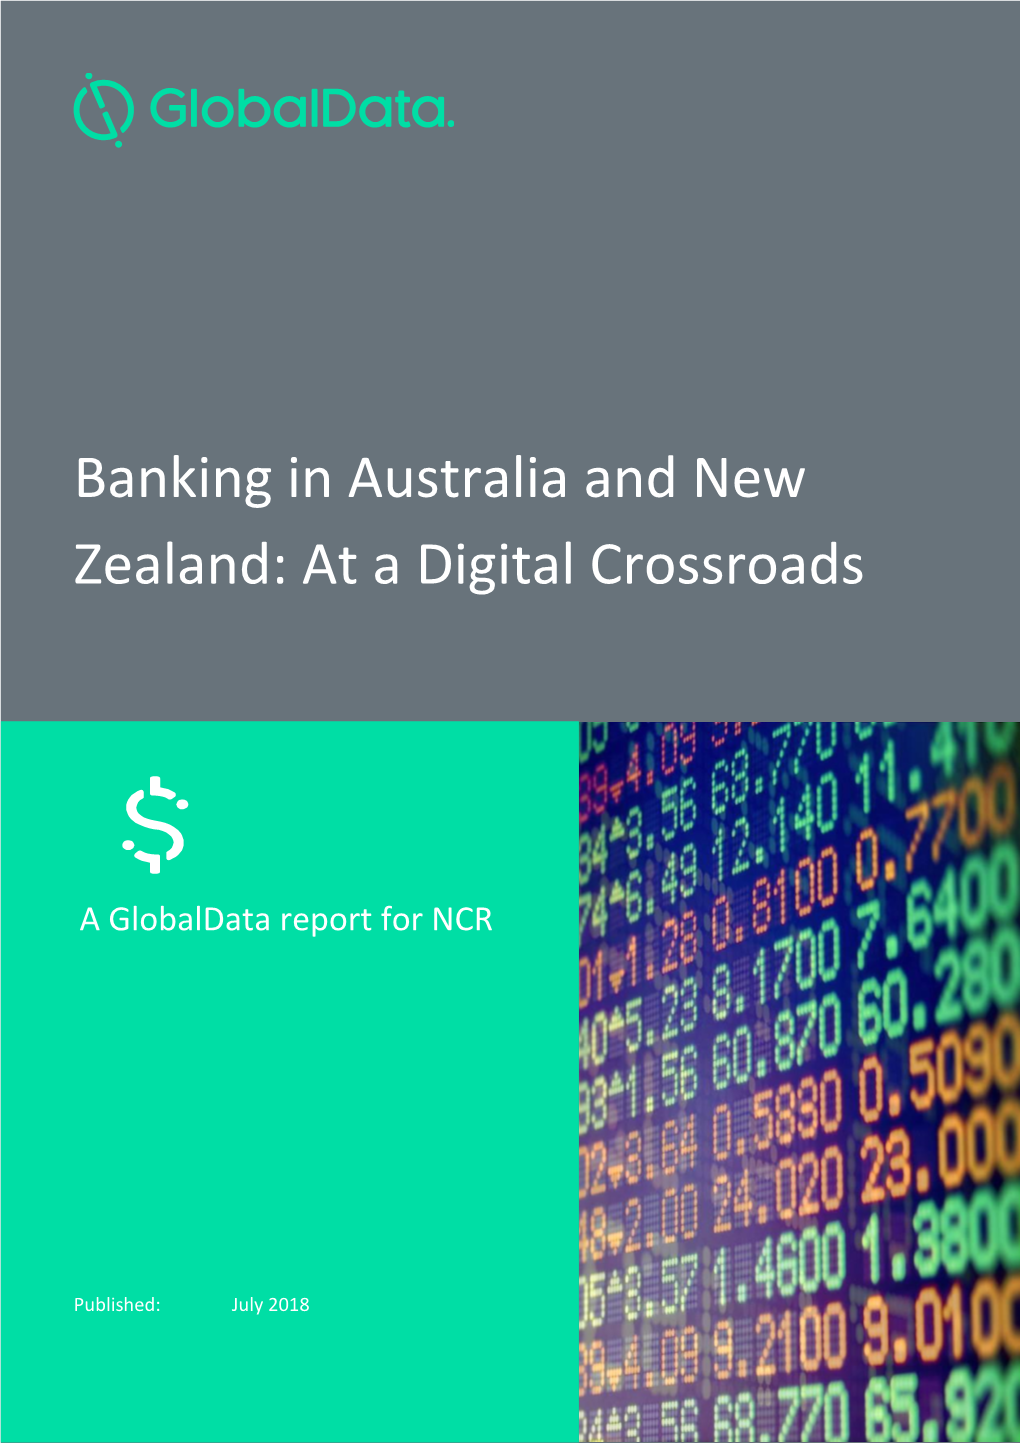 Banking in Australia and New Zealand: at a Digital Crossroads